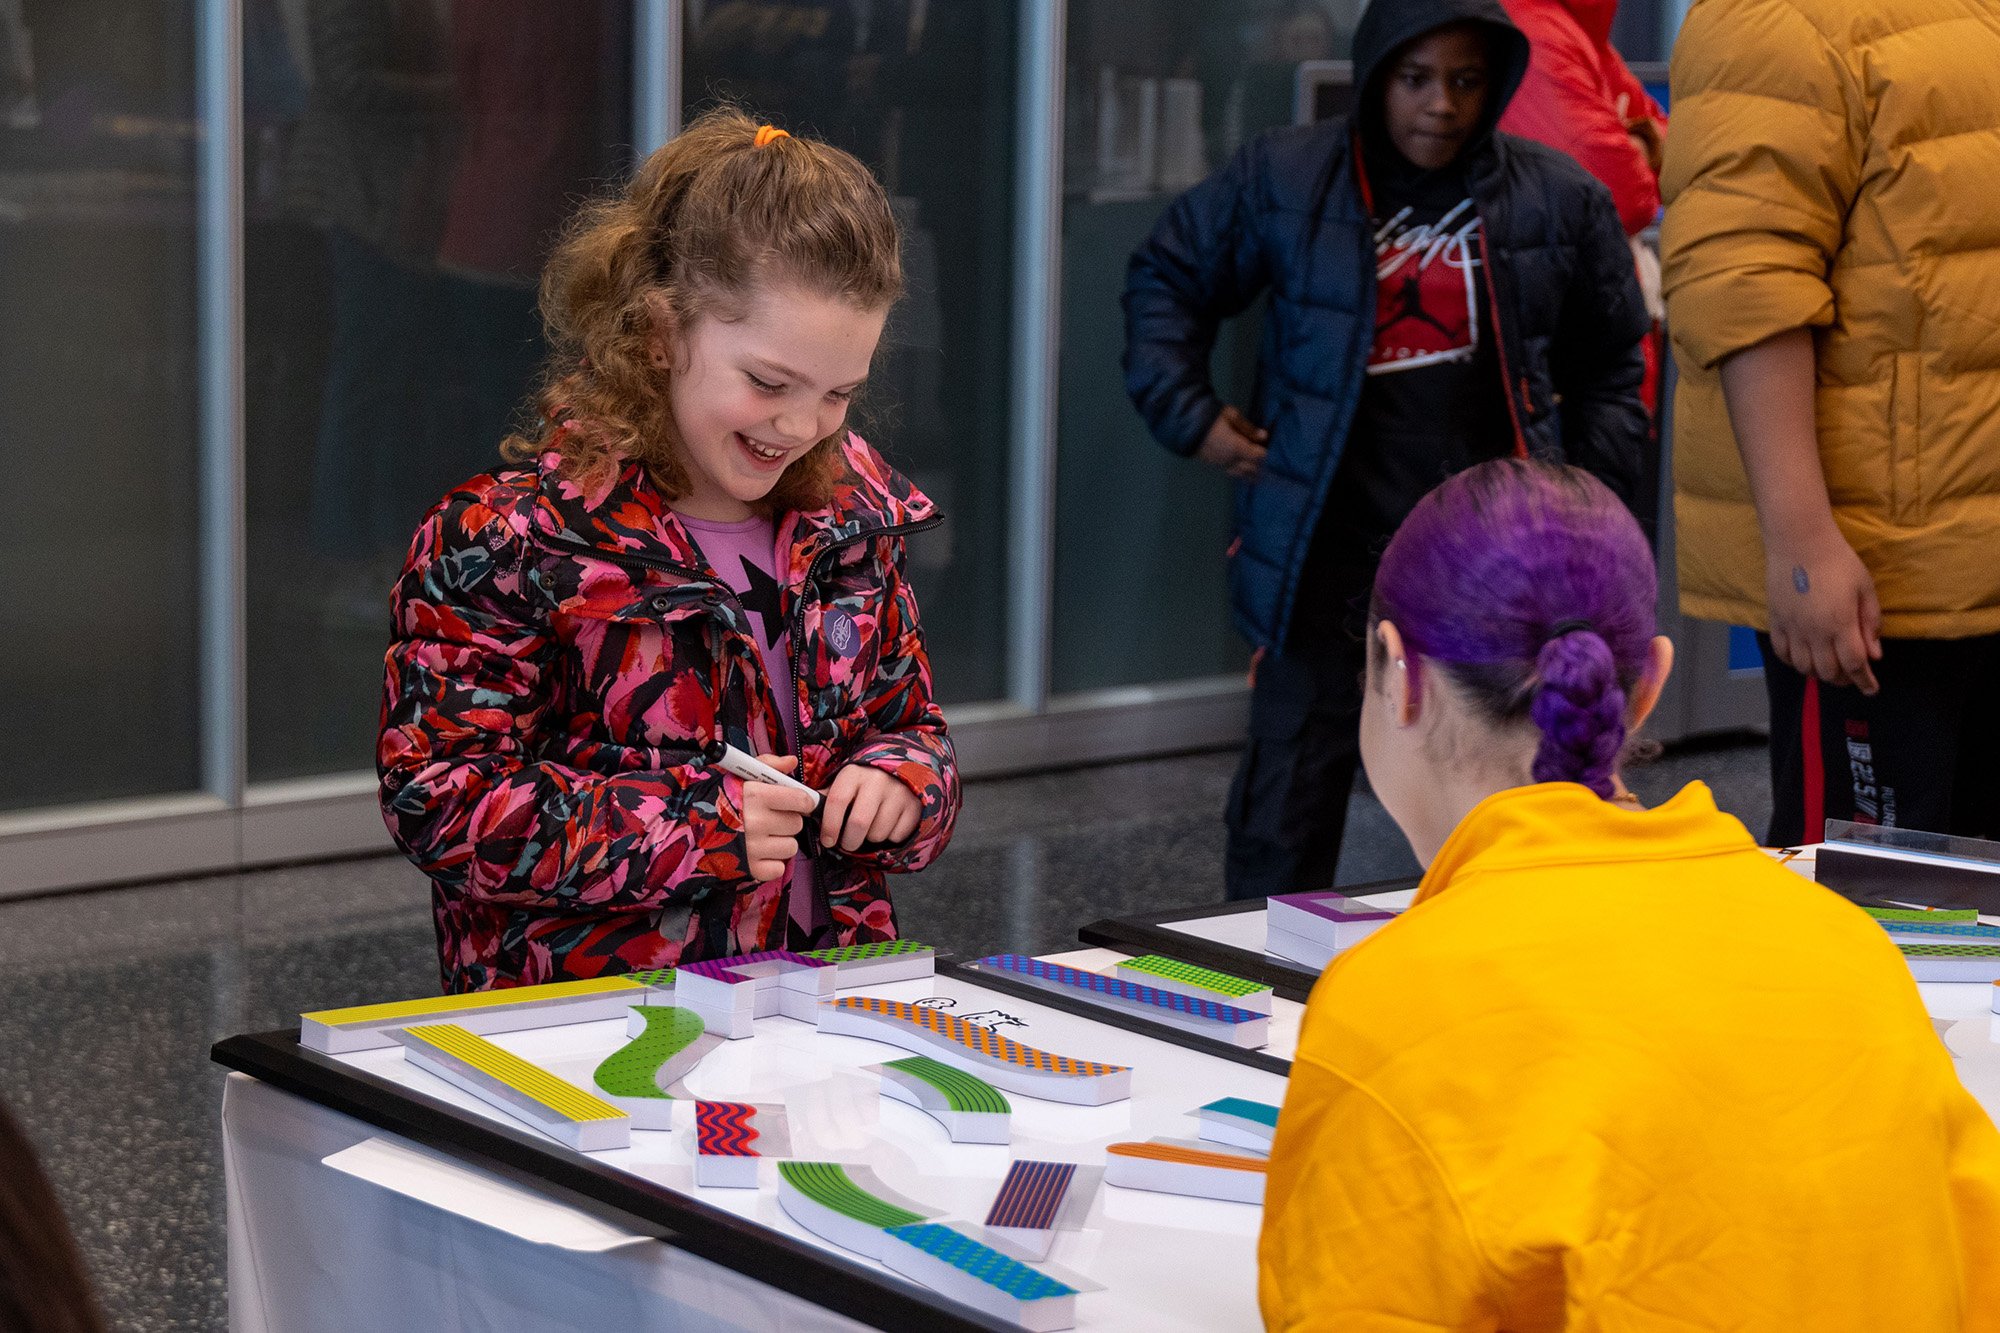 A young girl takes part in a science experiment at UAlbany's STEM & Nanotechnology Family Day at ETEC.